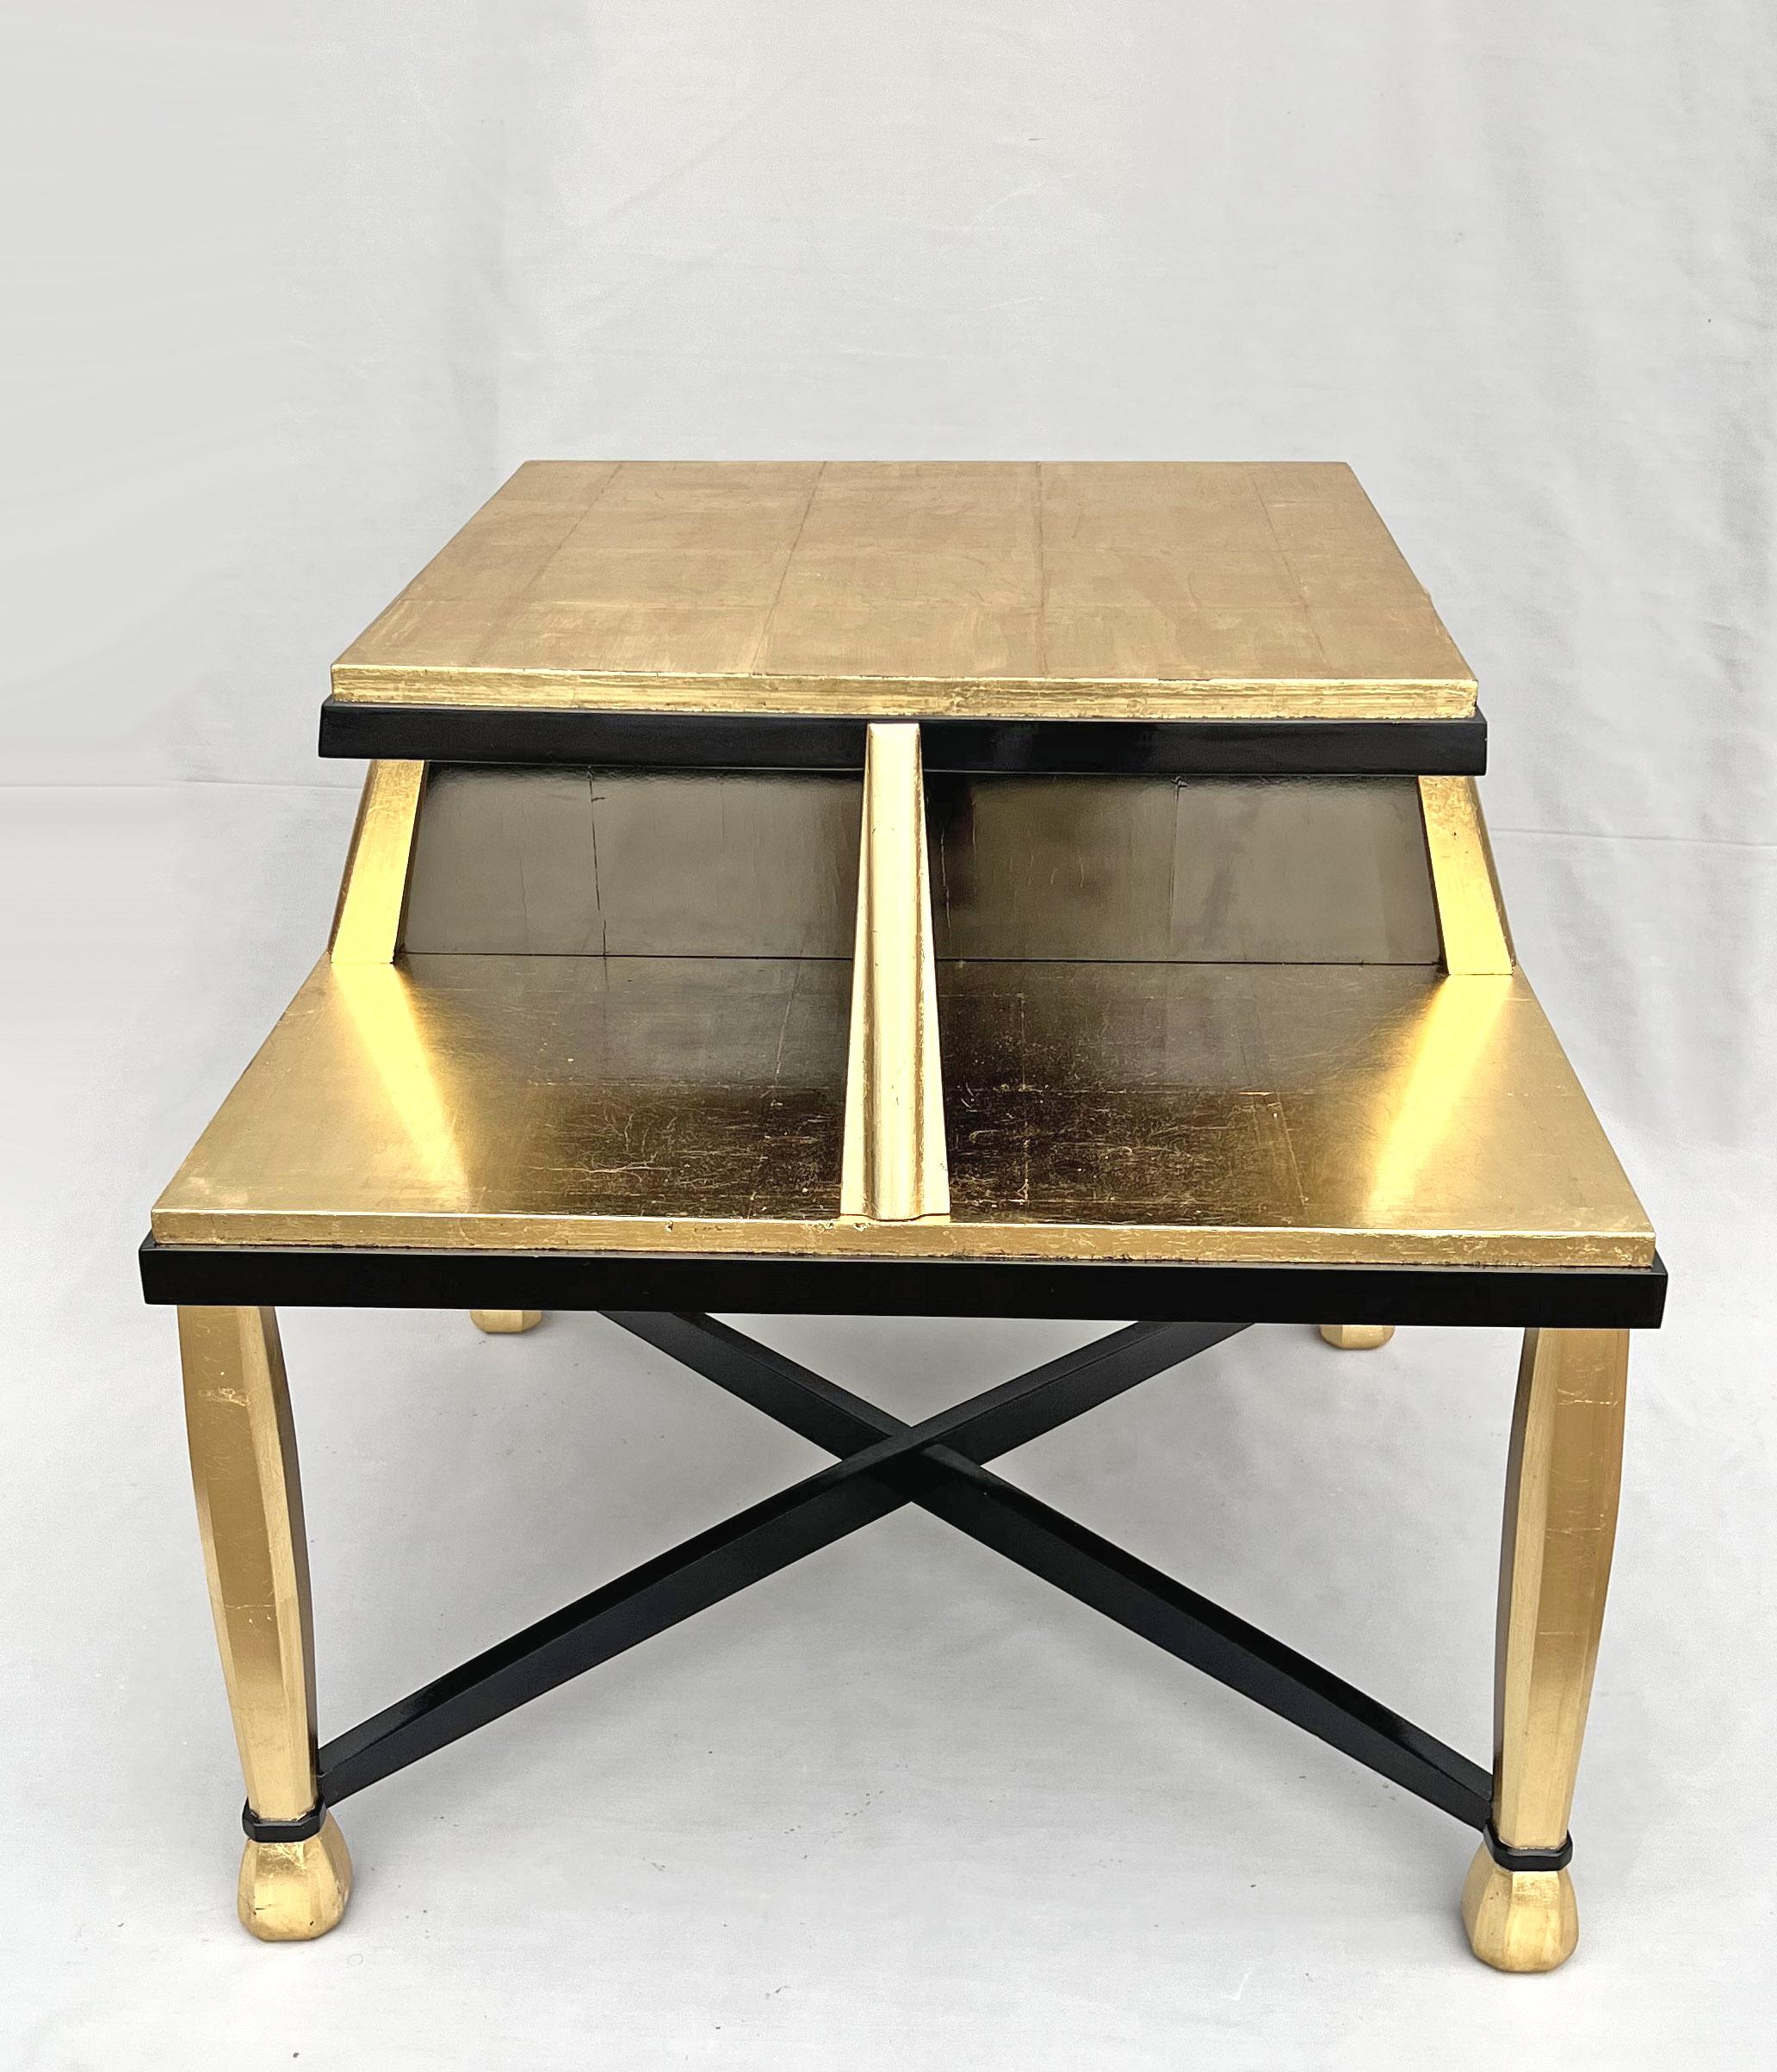 Important coffee table, from Art Deco period to 1925/1930, forming pedestal table or tea table, in black lacquer and gold leaf

The leaf gilding has been restored

Very good condition


Dimensions:
Total height 77 cm, height of the large tray: 50